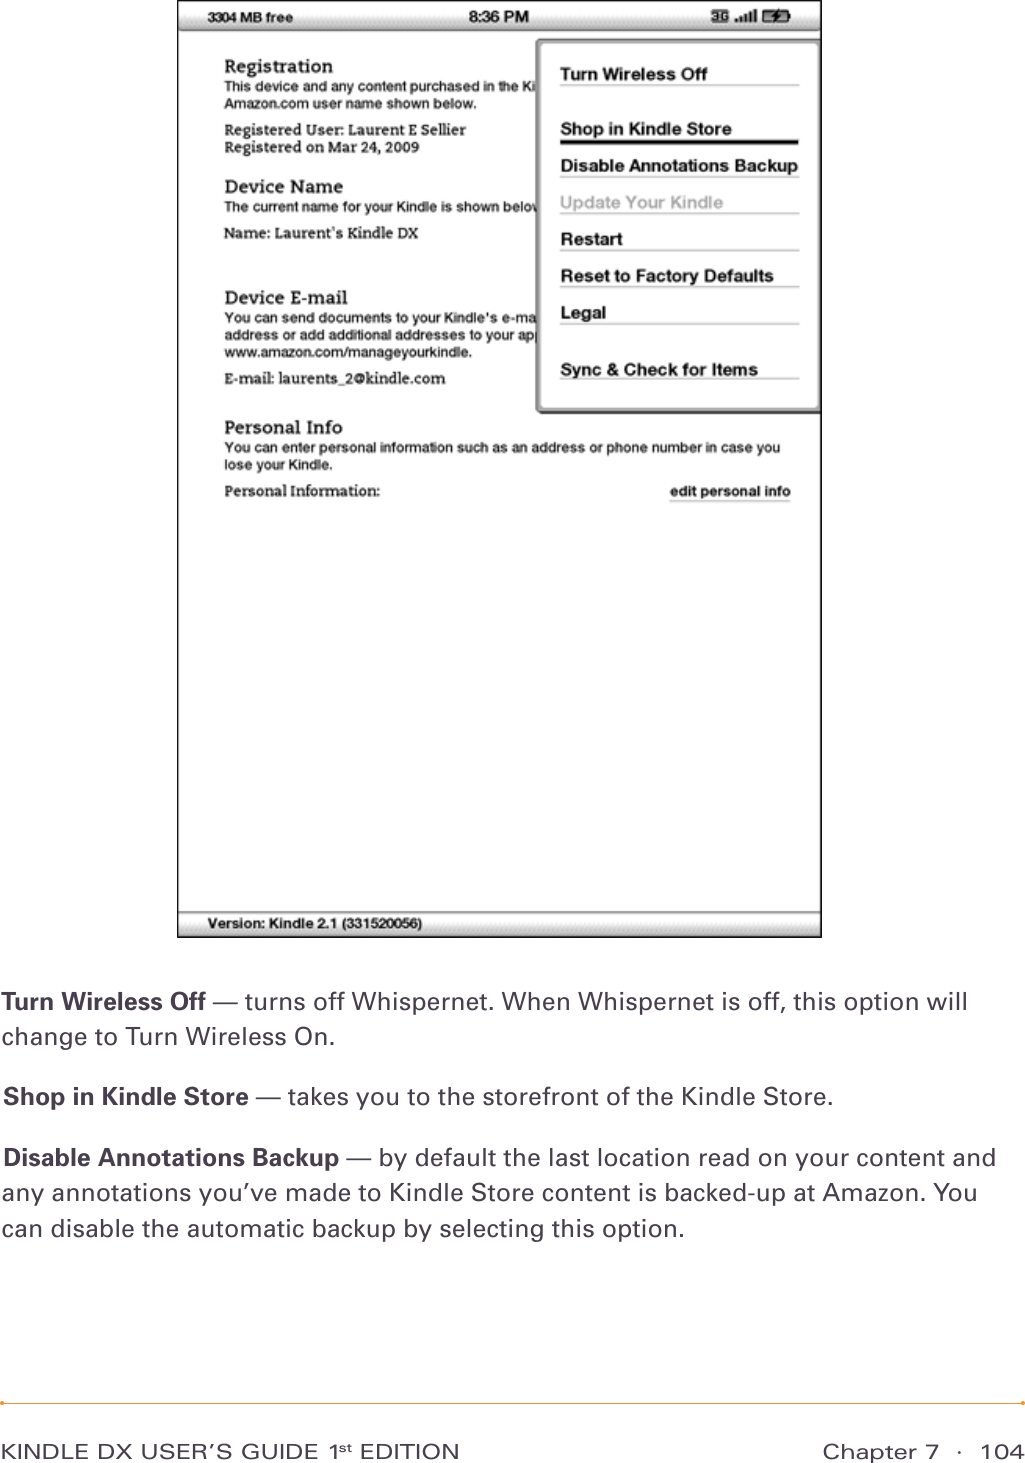 Chapter 7  ·  104KINDLE DX USER’S GUIDE 1st EDITIONTurn Wireless Off — turns off Whispernet. When Whispernet is off, this option will change to Turn Wireless On.Shop in Kindle Store — takes you to the storefront of the Kindle Store.Disable Annotations Backup — by default the last location read on your content and any annotations you’ve made to Kindle Store content is backed-up at Amazon. You can disable the automatic backup by selecting this option.